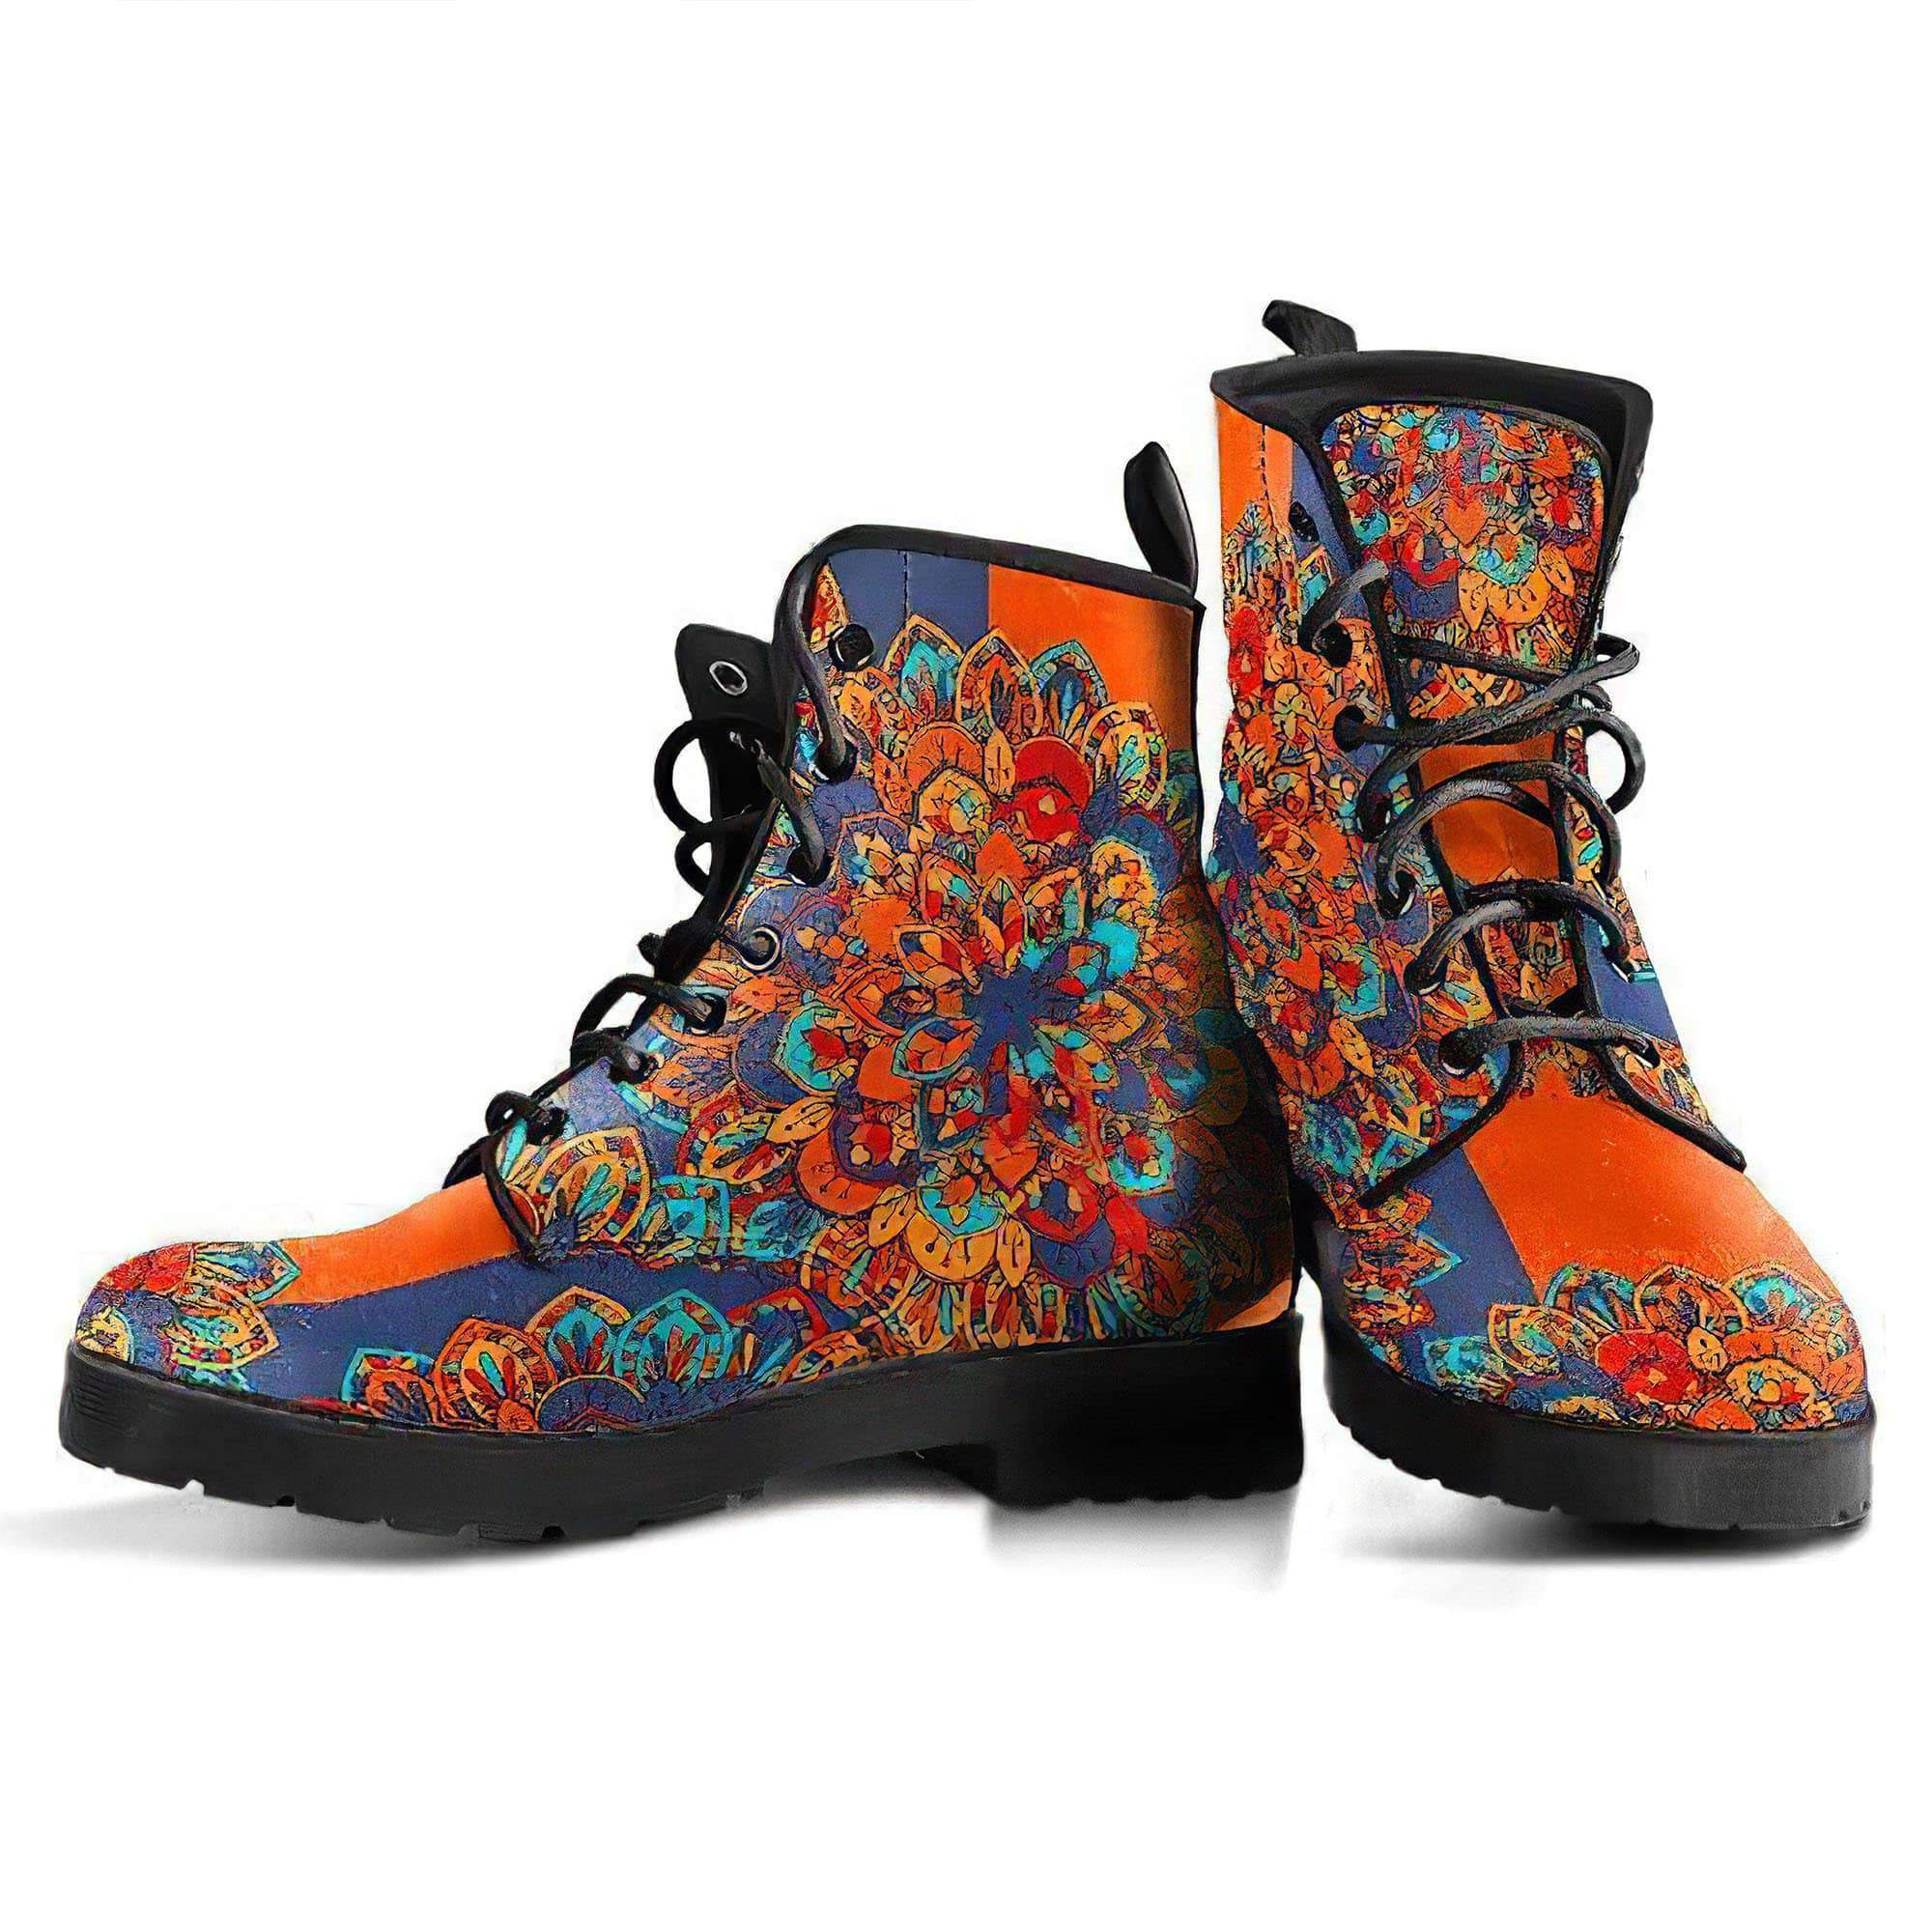 flower-mandala-handcrafted-boots-women-s-leather-boots-12051855900733.jpg